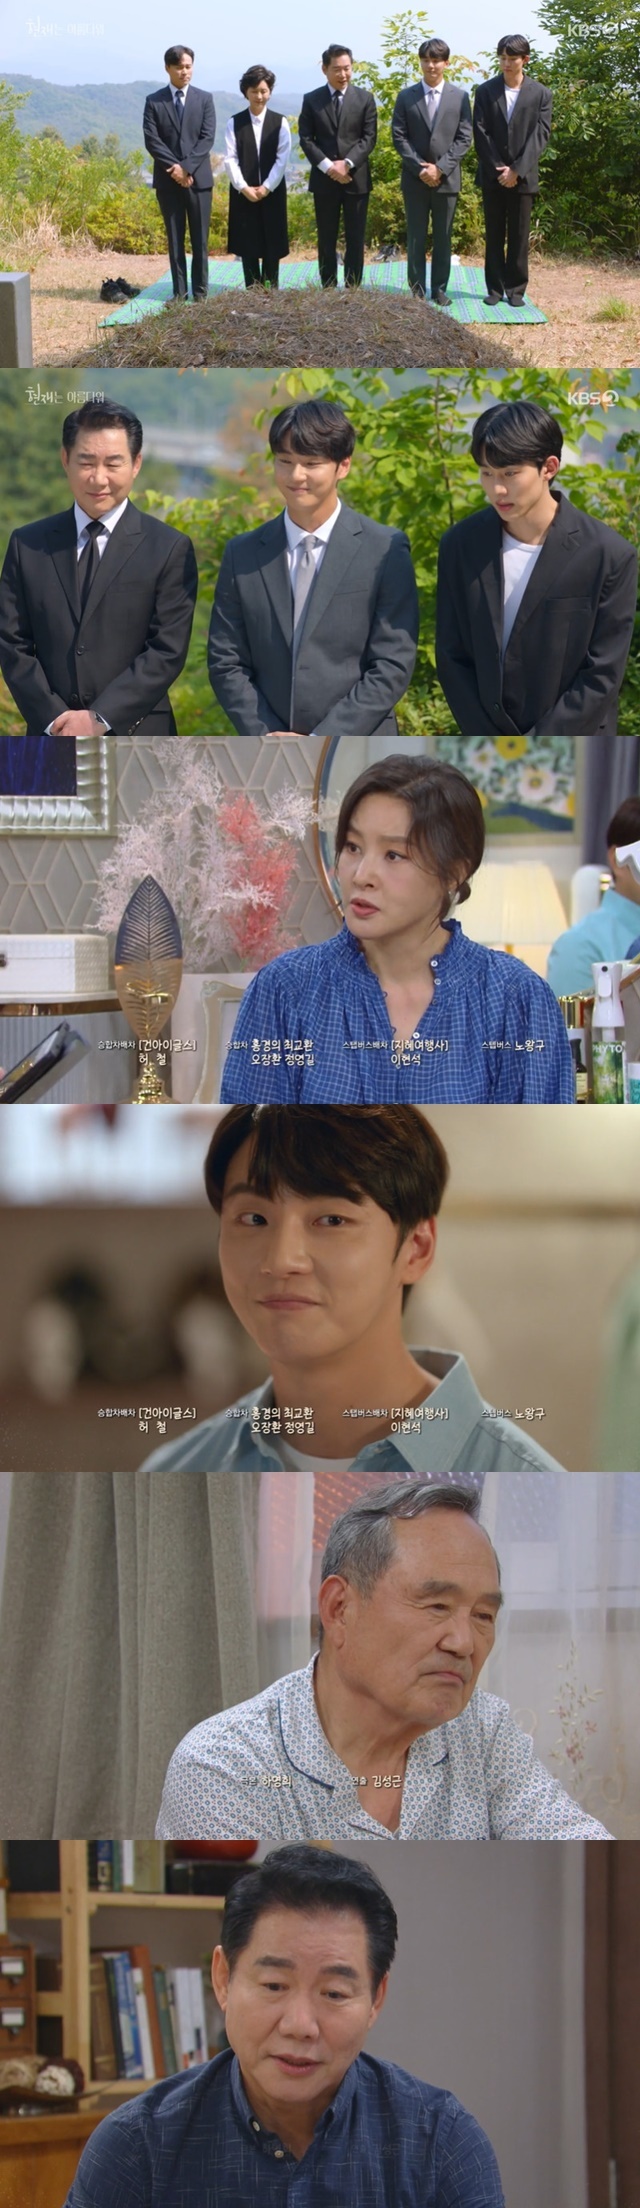 Following his father Park Sang-won, son Yoon Shi-yoon also predicted Love Danger with suspicion of Adoptionia.Lee Min-ho (Park Sang-won) took three sons to his parents sanctuary in the 19th KBS 2TV Weekend drama It\s Beautiful Nowplayplayed by Myung Hee Ha/directed by Kim Sung-geun) broadcast on June 4.On the day of the broadcast, Lee Min-ho told his father, Lee kyung-cheol (Park In-Hwan), that he would take his sons professional-making (Oh Min-seok), Lee Hyun-Jae (Yoon Shi-yoon), and Lee Soo-jae (Seo Bum-jun) to visit his parents sanctuary.Lee kyung-cheol cared about Adoption son Lee Min-ho saying he would not go with him because he would be uncomfortable.The marriage project, which took the apartment of three brothers, Profit-making, Lee Hyun-Jae and Lee Soo-jae, made progress.Profit-making and Shim Hae-jun (Shin Dong-mi Boone) were upgraded from Thumb to Love with kisses.However, Shim Hae-joon was angry that he had been hit by Danger because of the fact that the professional-making was a cheater in the past, and the professional-making was angry that he would catch the Whistle Blower even after the misunderstanding was solved.The current Future (Bae Da-bin) was told by his mother, Gene (Park Ji-young), that it was time to focus more on work, and decided to go out only with Lee Hyun-Jae and Weekend.Lee Hyun-Jae felt that the current Future was pushed after Love, but he made a lunch box first and showed a sweet appearance by dating.Lee Soo-jae focused on acquiring the gym from a friend as Lo Wei (Choi Ye-bin) hesitated to fake marriage because of guilt.Lee Soo-jae took out a loan, paid the balance and gave Lo Wei a bouquet of surprise events.Hyun Jung-hoo (played by Kim Kang-min), the head of the department, who works with Lo Wei, showed a complex look as he watched Lo Wei and Lee Soo-jaes Love in real time.At the end of the broadcast, Lee Min-ho took his wife Han Kyung-ae (Kim Hye-ok) and three sons to his biological parents grave and stimulated his sister Lee Kyung-soon (Sun Woo-yong) to stay alone.Lee Kyung-soon said, This is why blood is important. Lee kyung-cheol was upset by his brother.